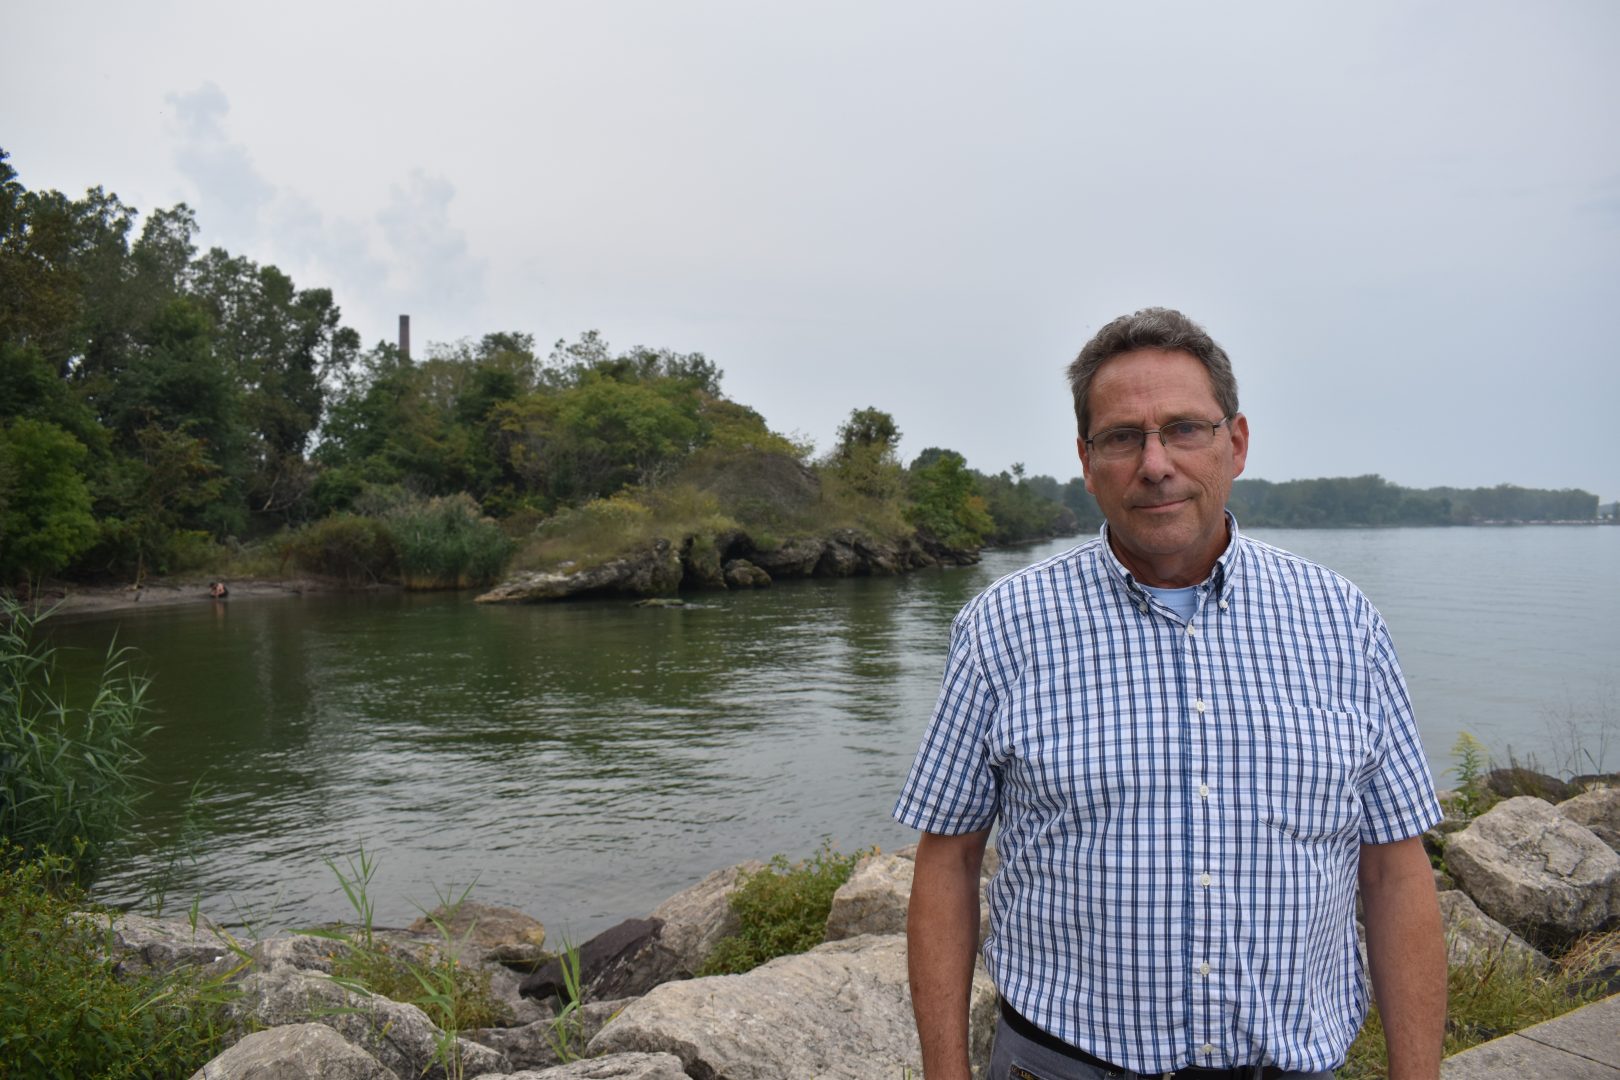 Mike Campbell, a college biology professor, is seen on Sept. 11, 2019, in a boat launch area with a smokestack of Erie Coke visible in the background.